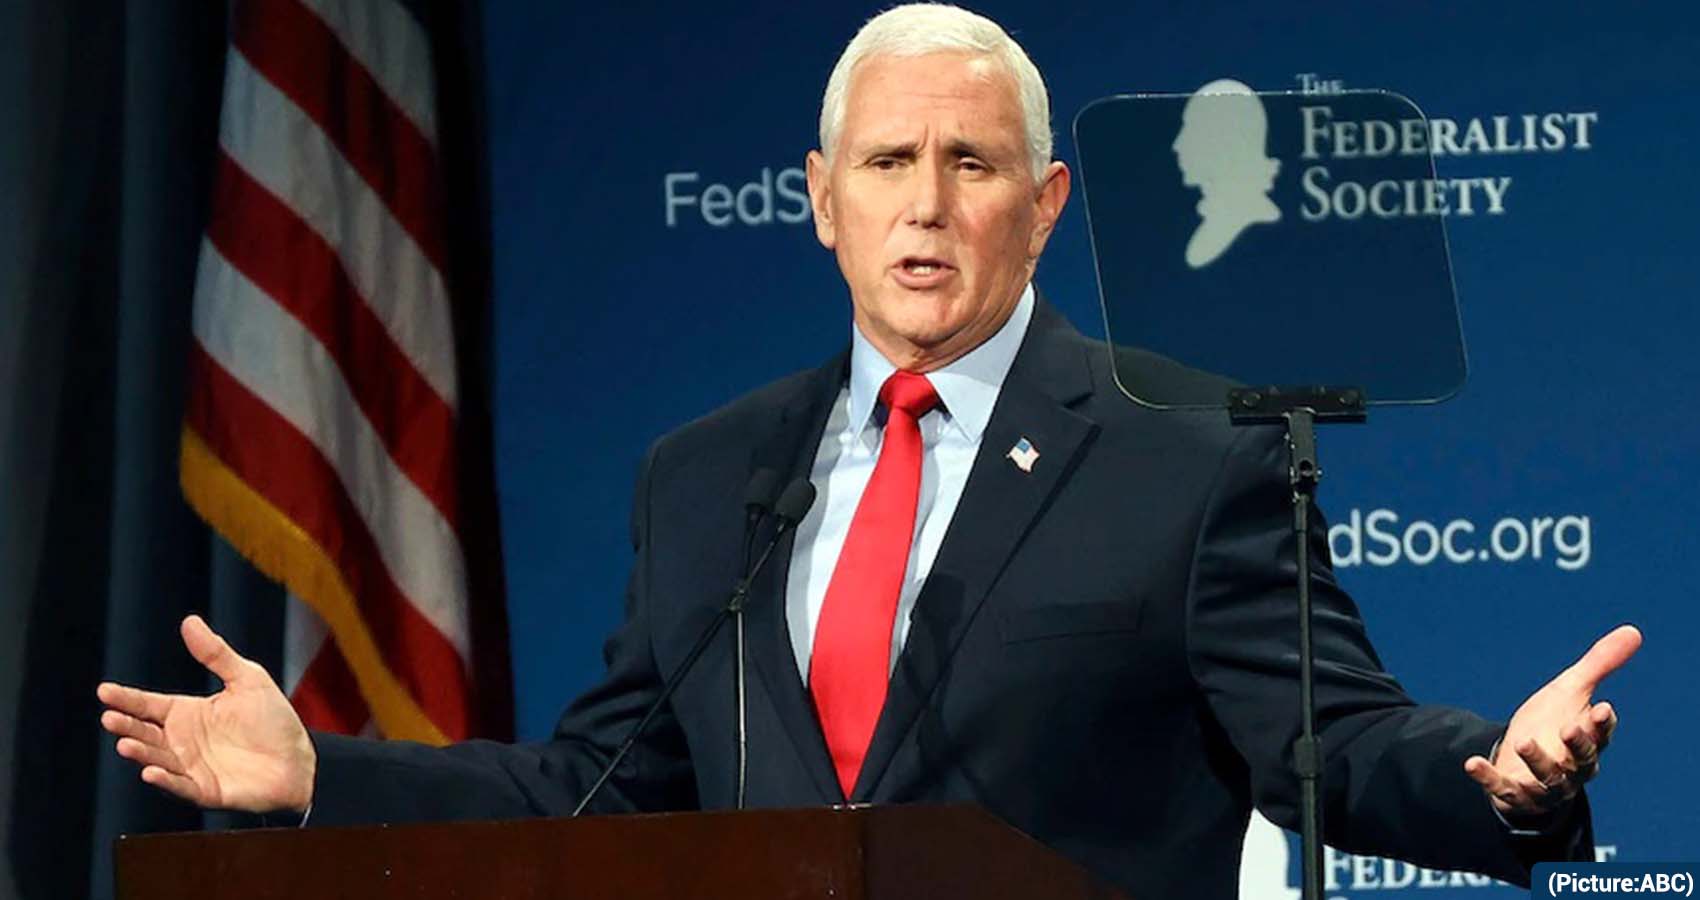 Mike Pence Says, “Trump Was Wrong To Say I Could Overturn Biden Win”